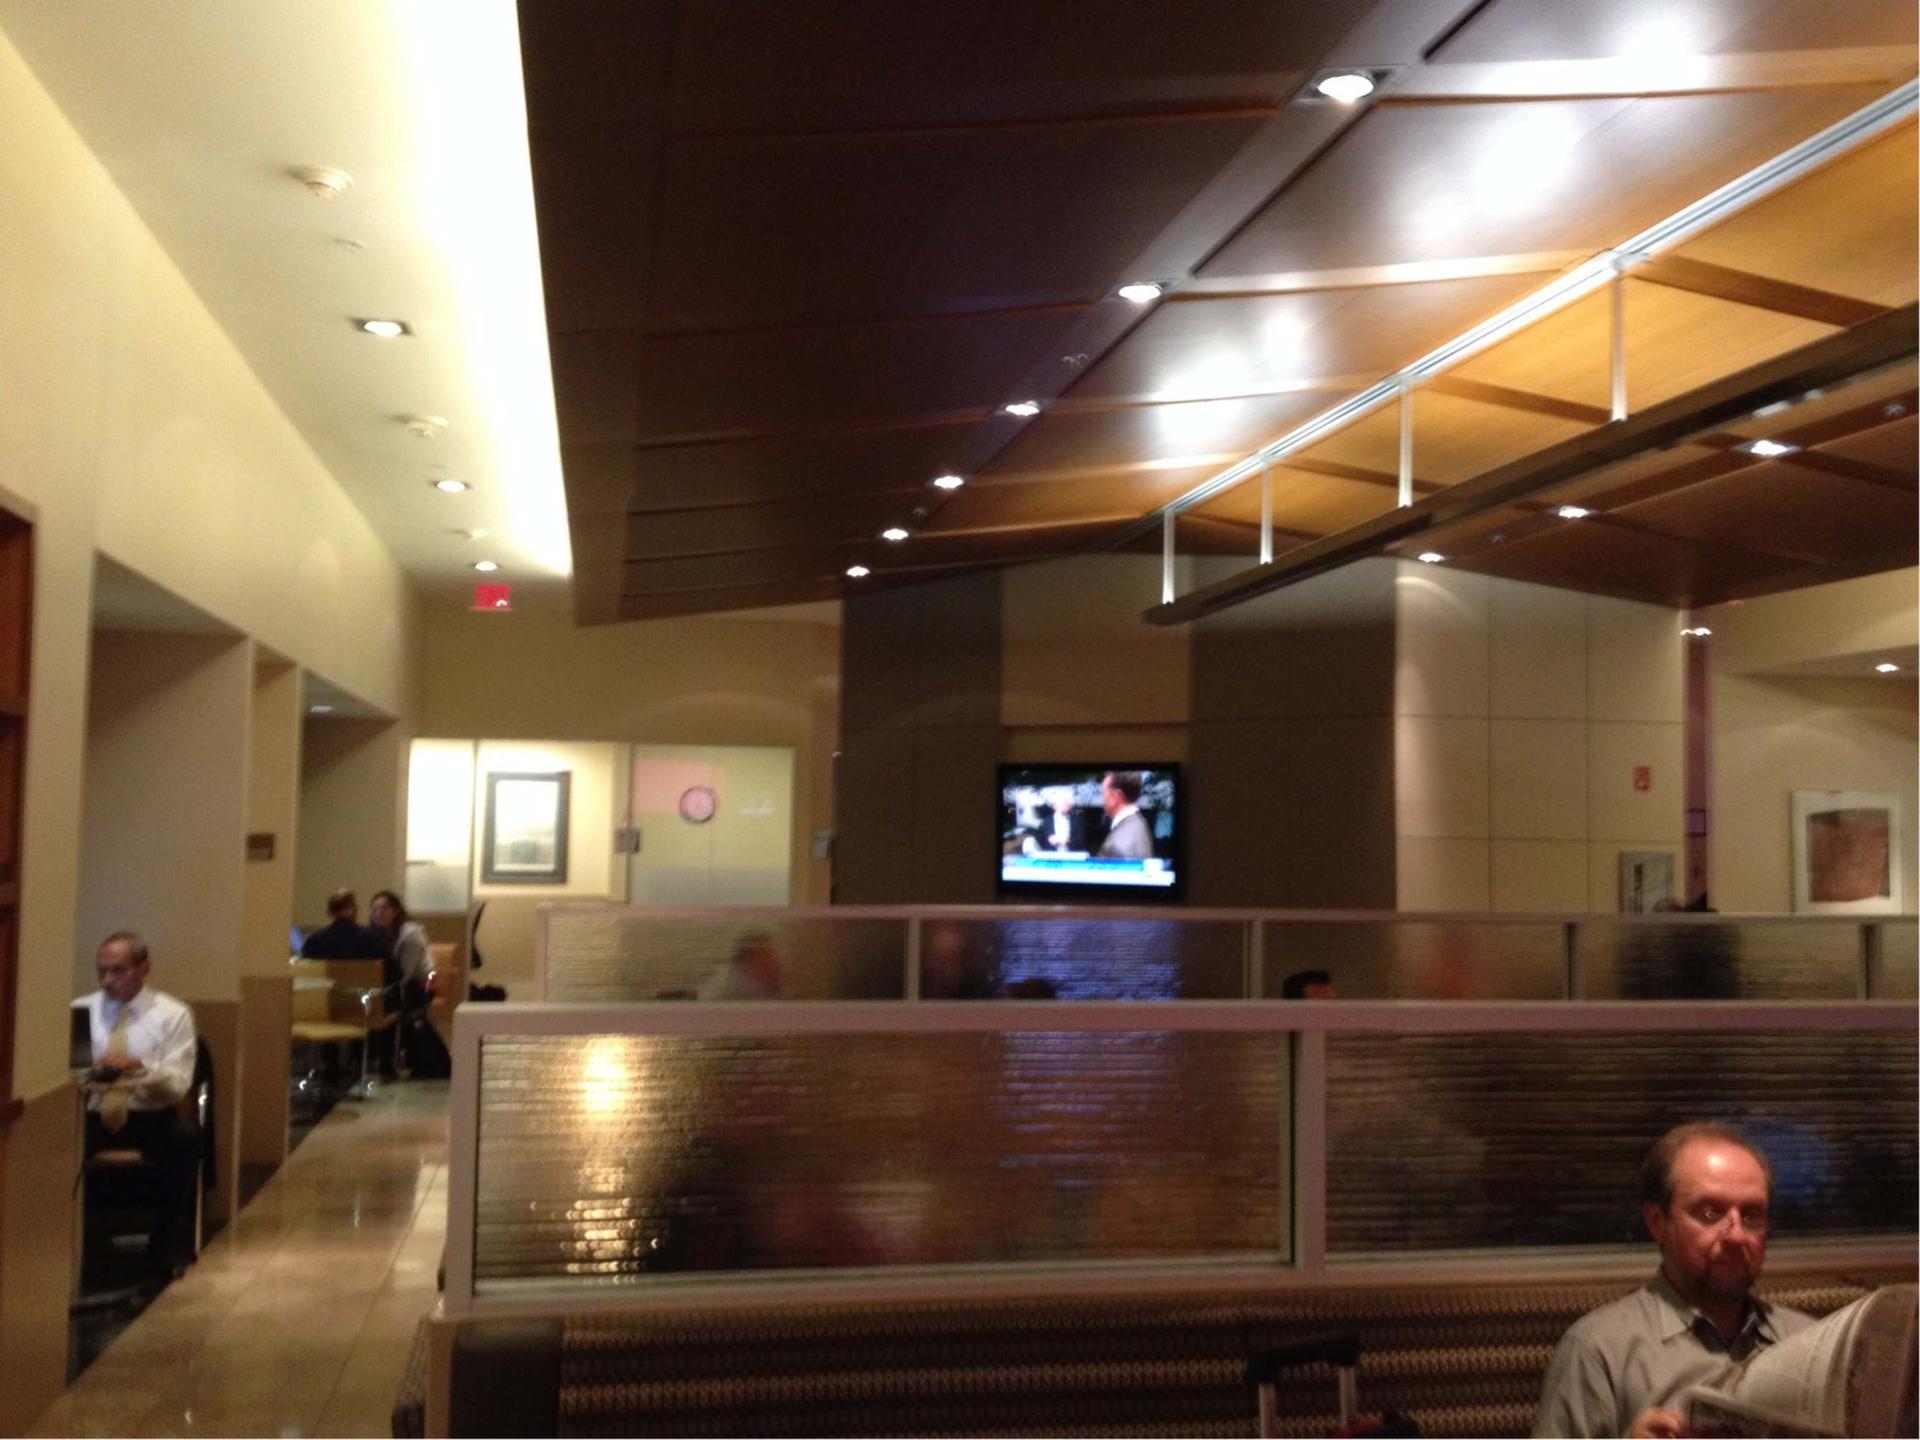 American Airlines Admirals Club image 7 of 31